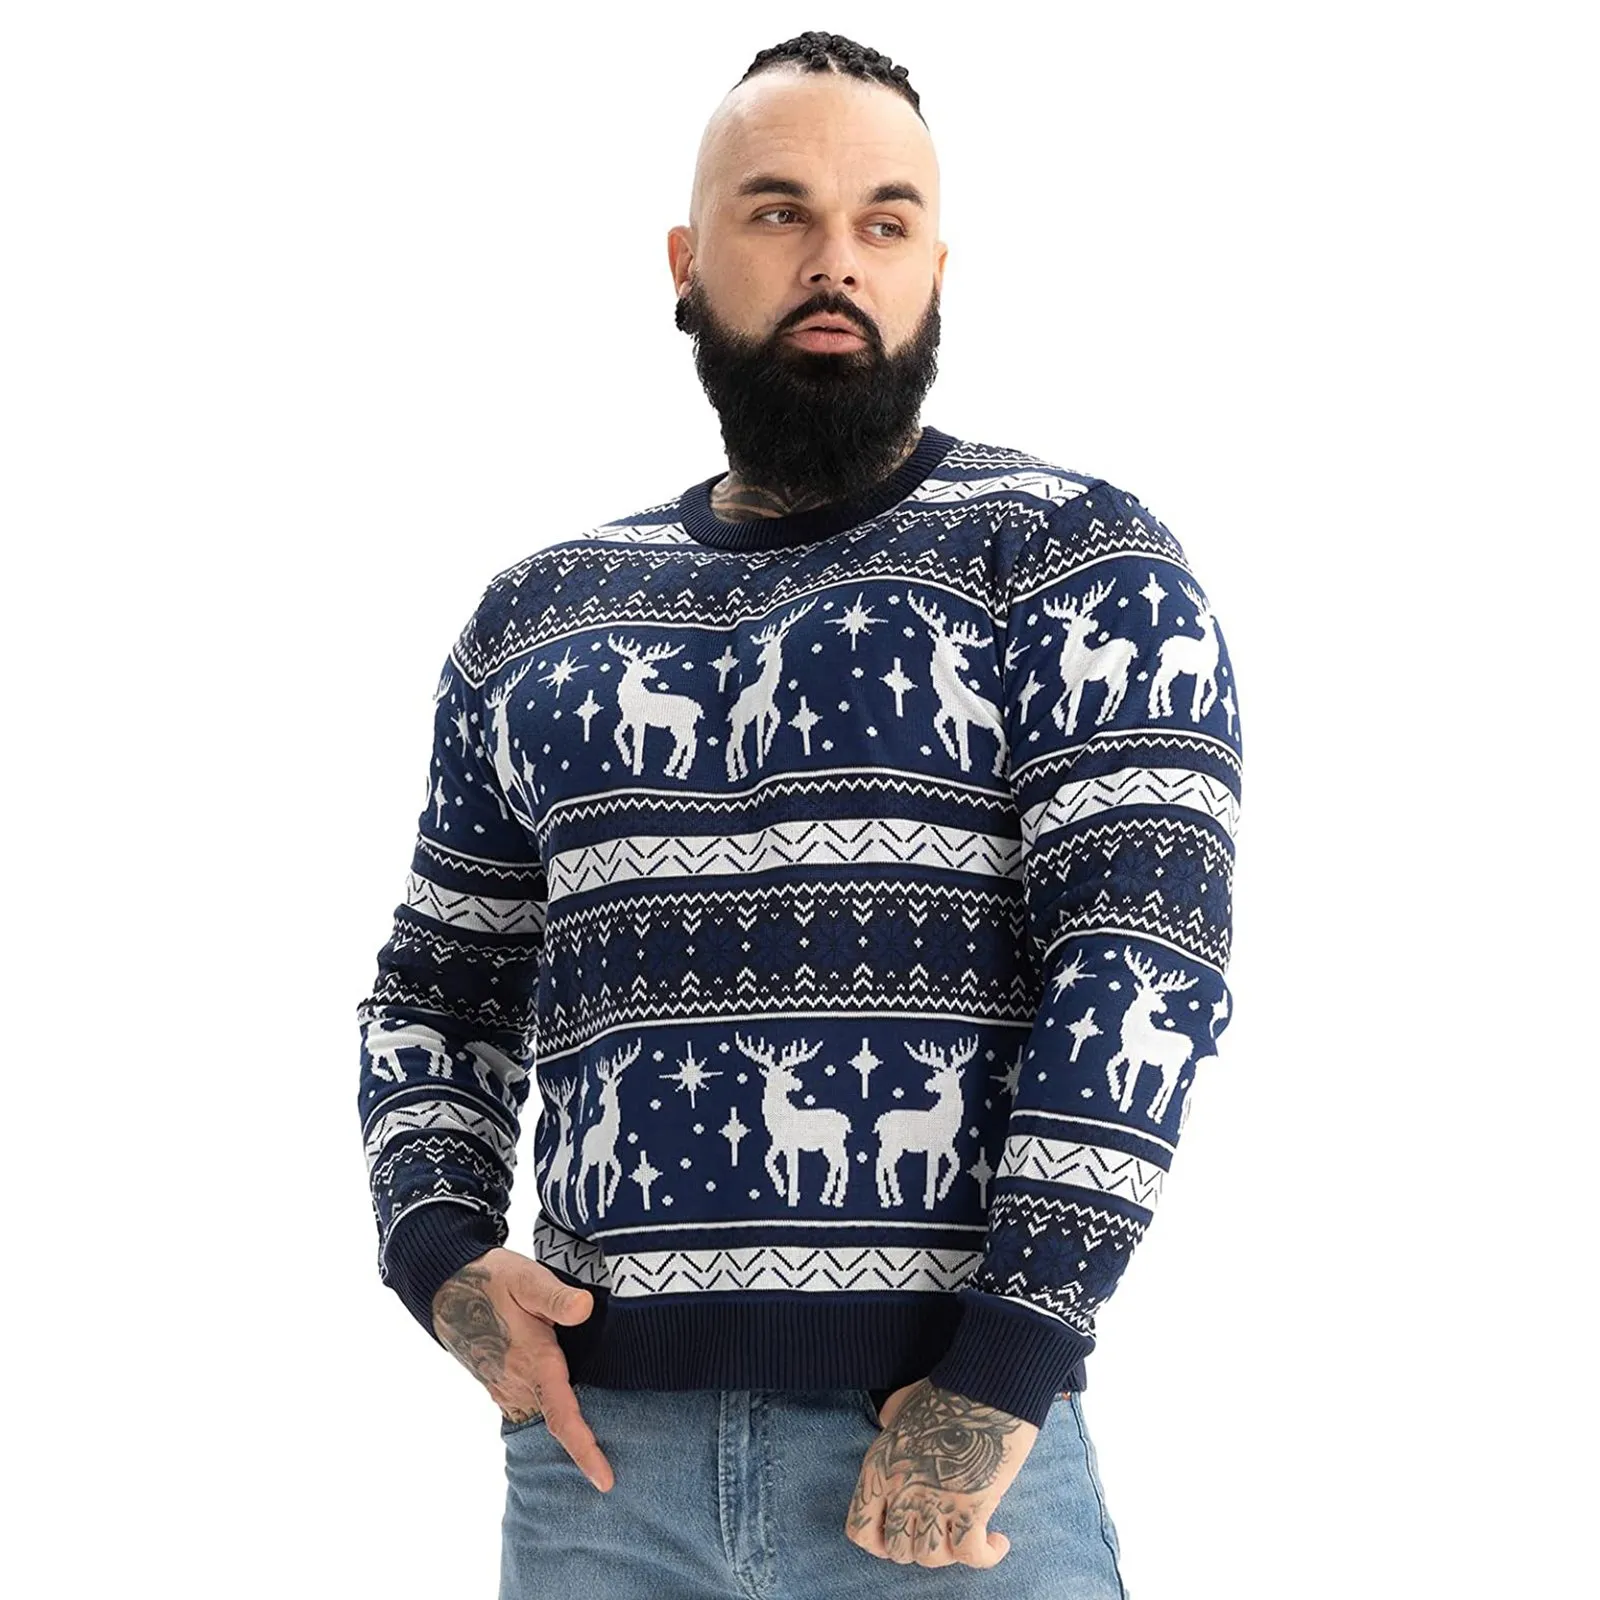 Reindeer on Repeat Mens Funny Christmas Sweater  Blue